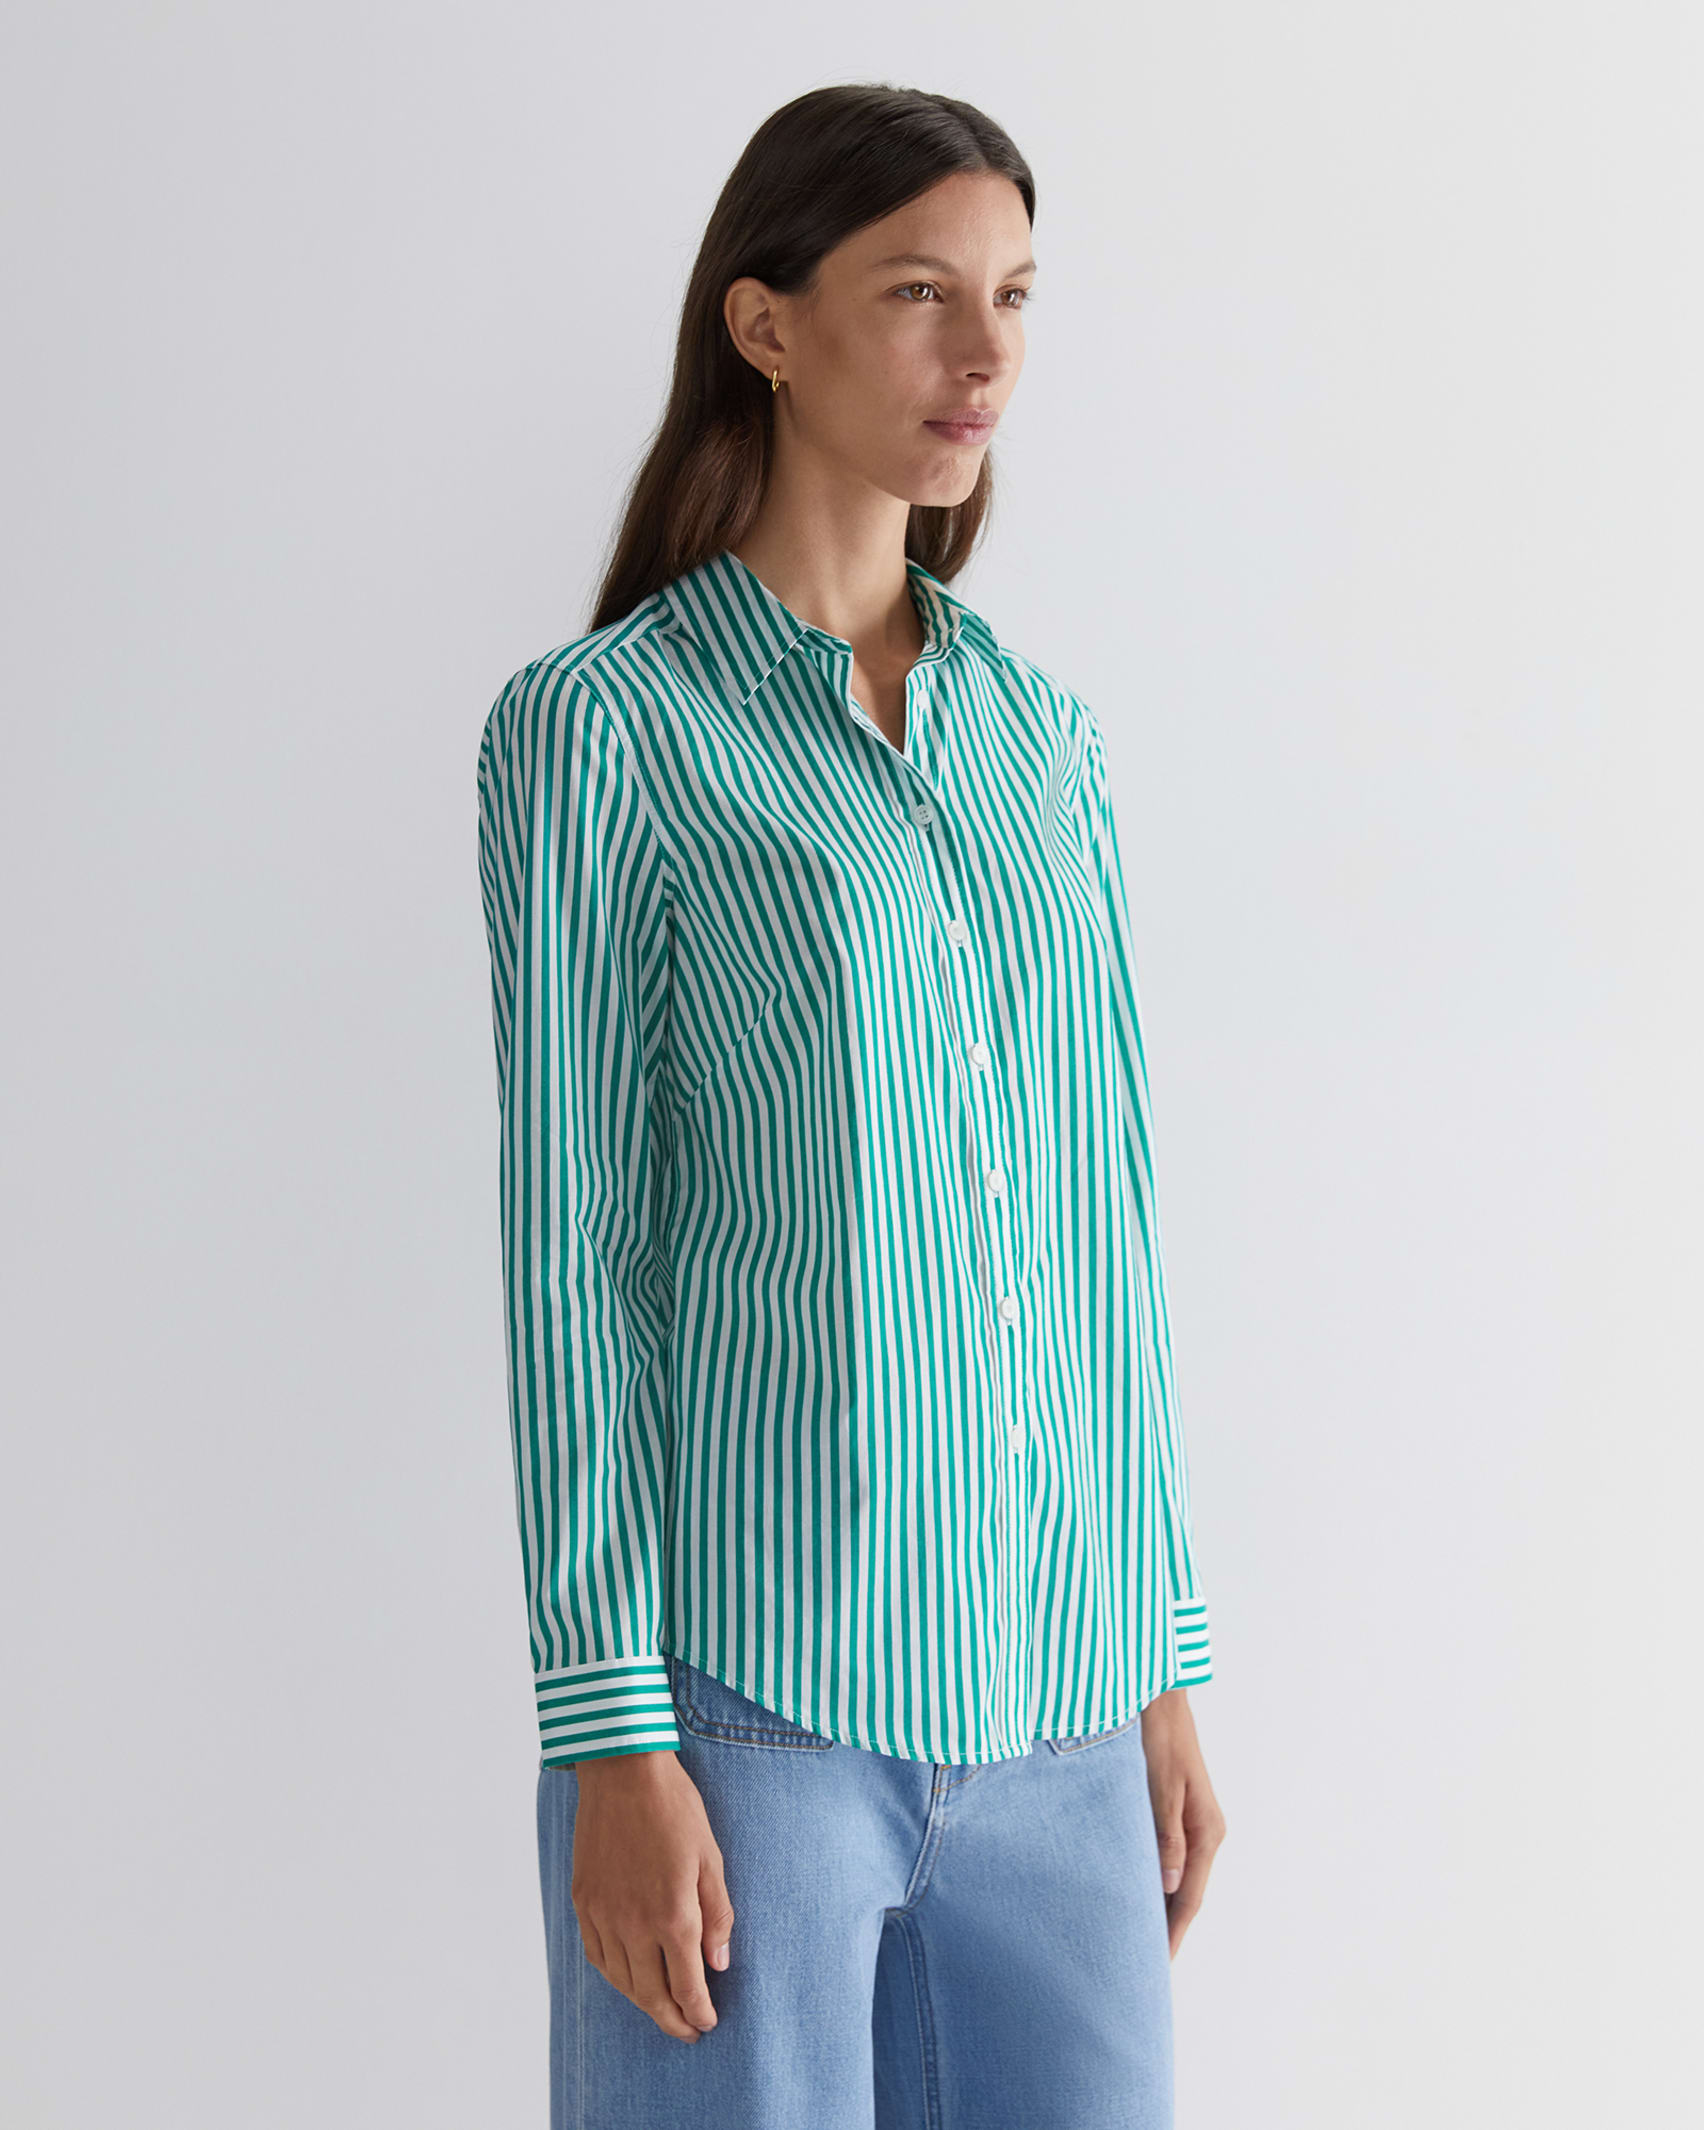 Stripe Lily Voile Shirt in GREEN MULTI